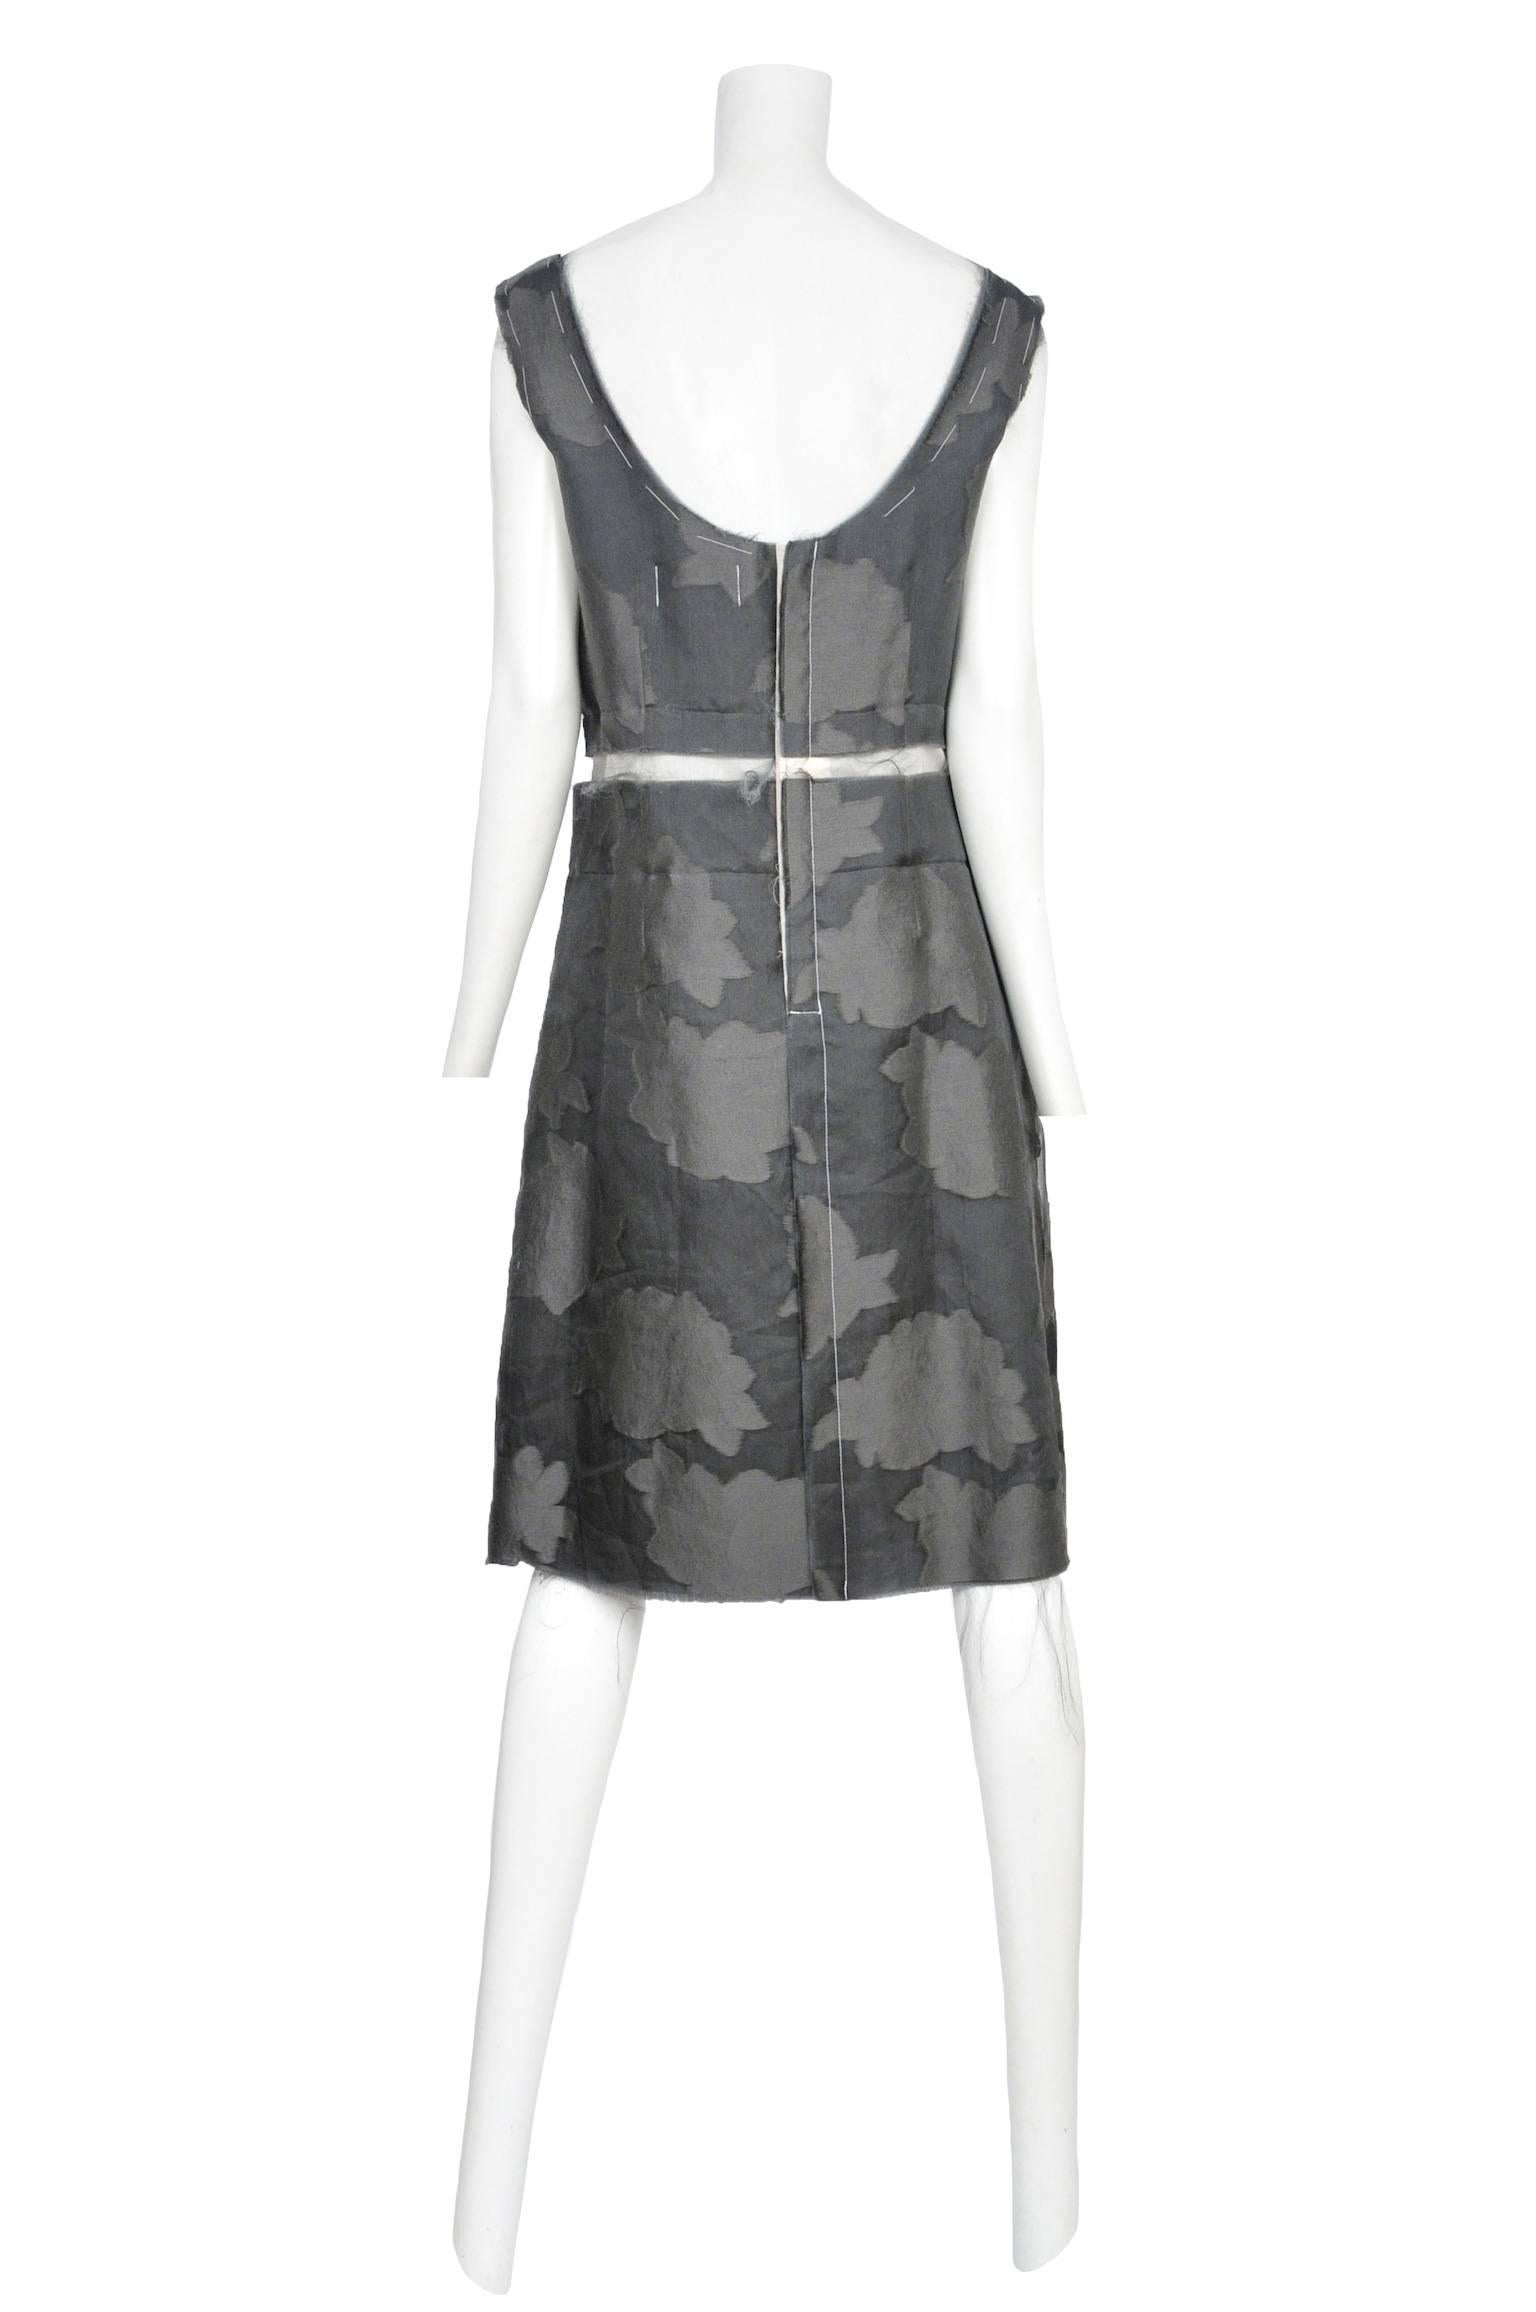 Vintage Comme des Garcons sleeveless grey floral silk damask shift dress featuring exposed darts at the front and white mesh panel around the waist. Circa 1998.

Please contact us for additional photos.